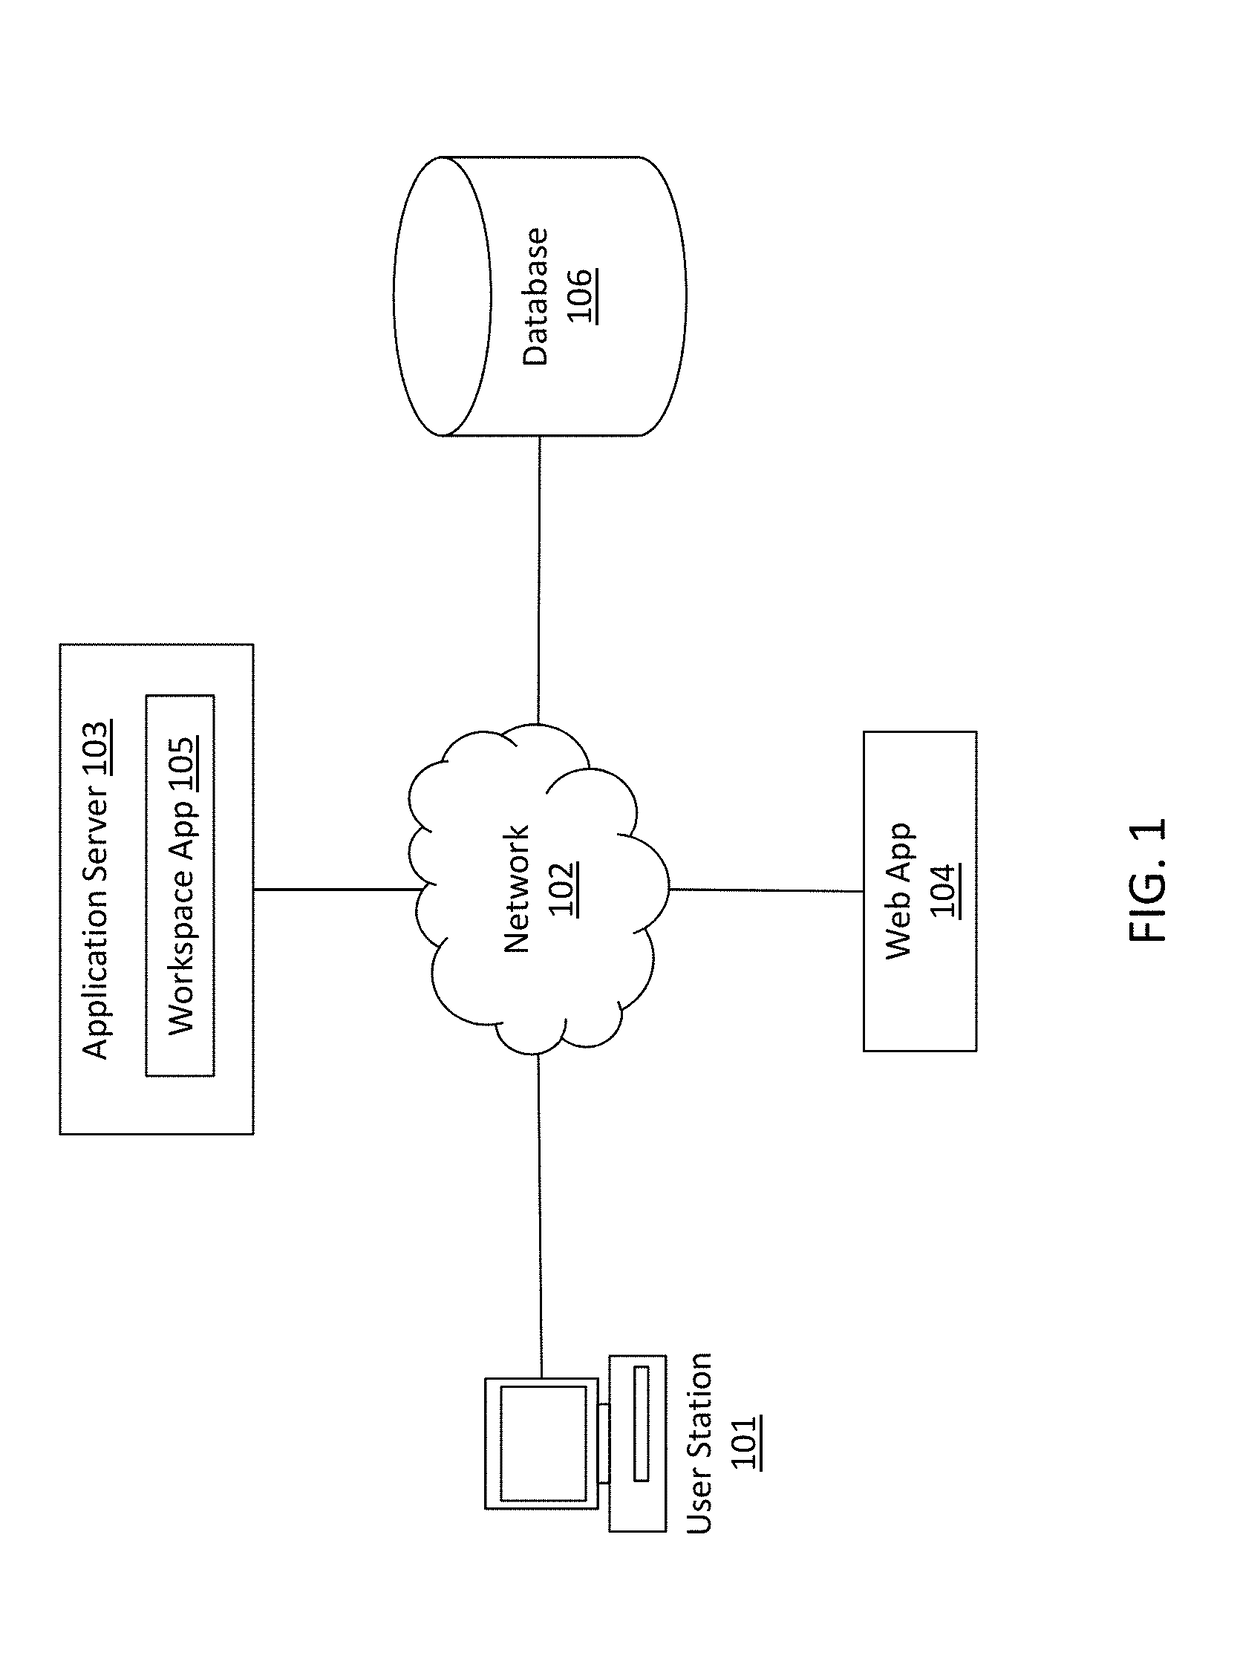 System and method of generating data points from one or more data stores of data items for chart creation and manipulation